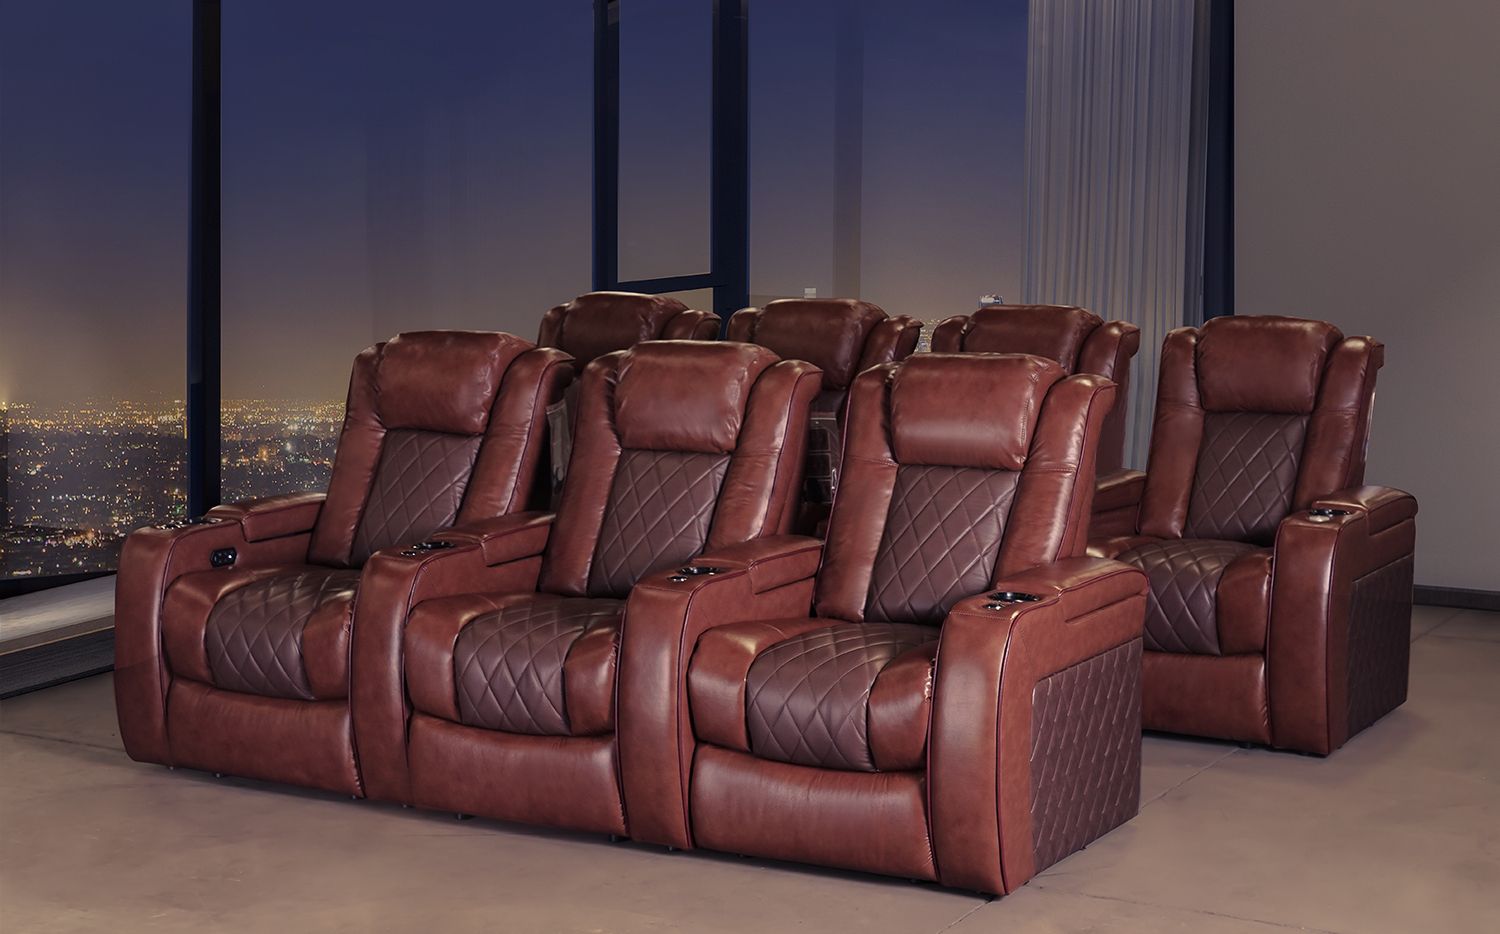 valencia home theater seating